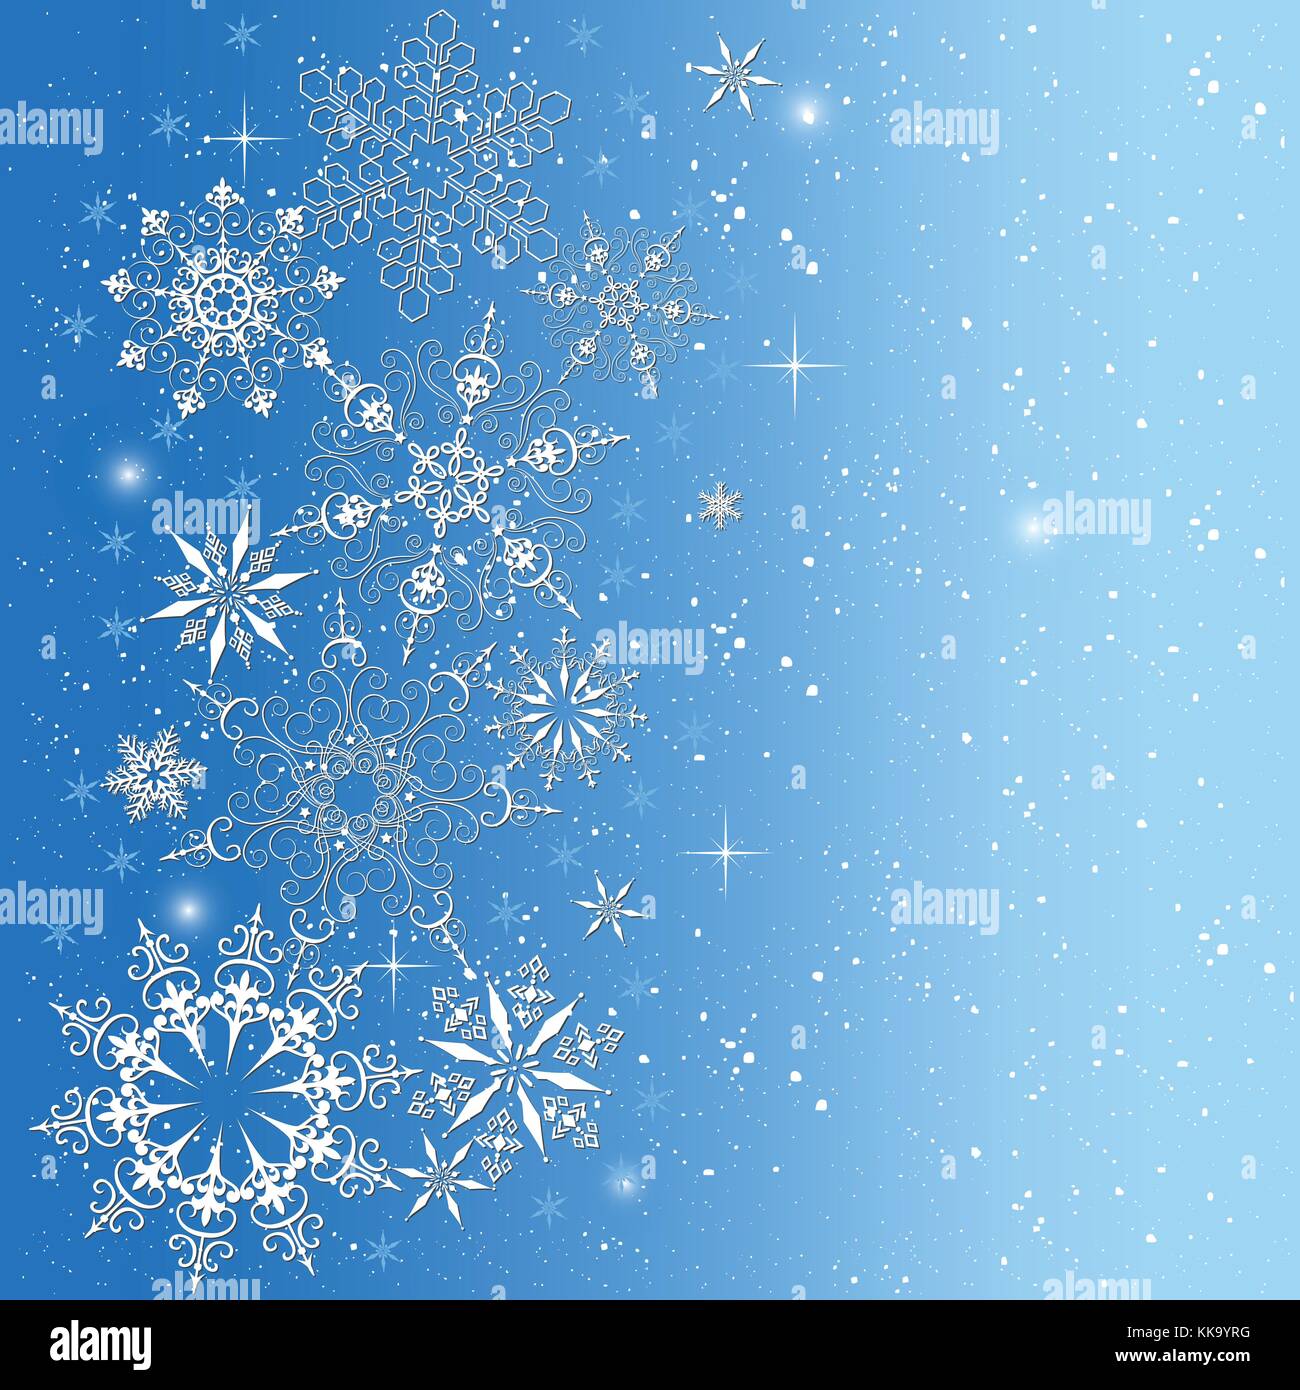 Elegant Christmas background with snowflakes. New year and Christmas greetings design Stock Vector